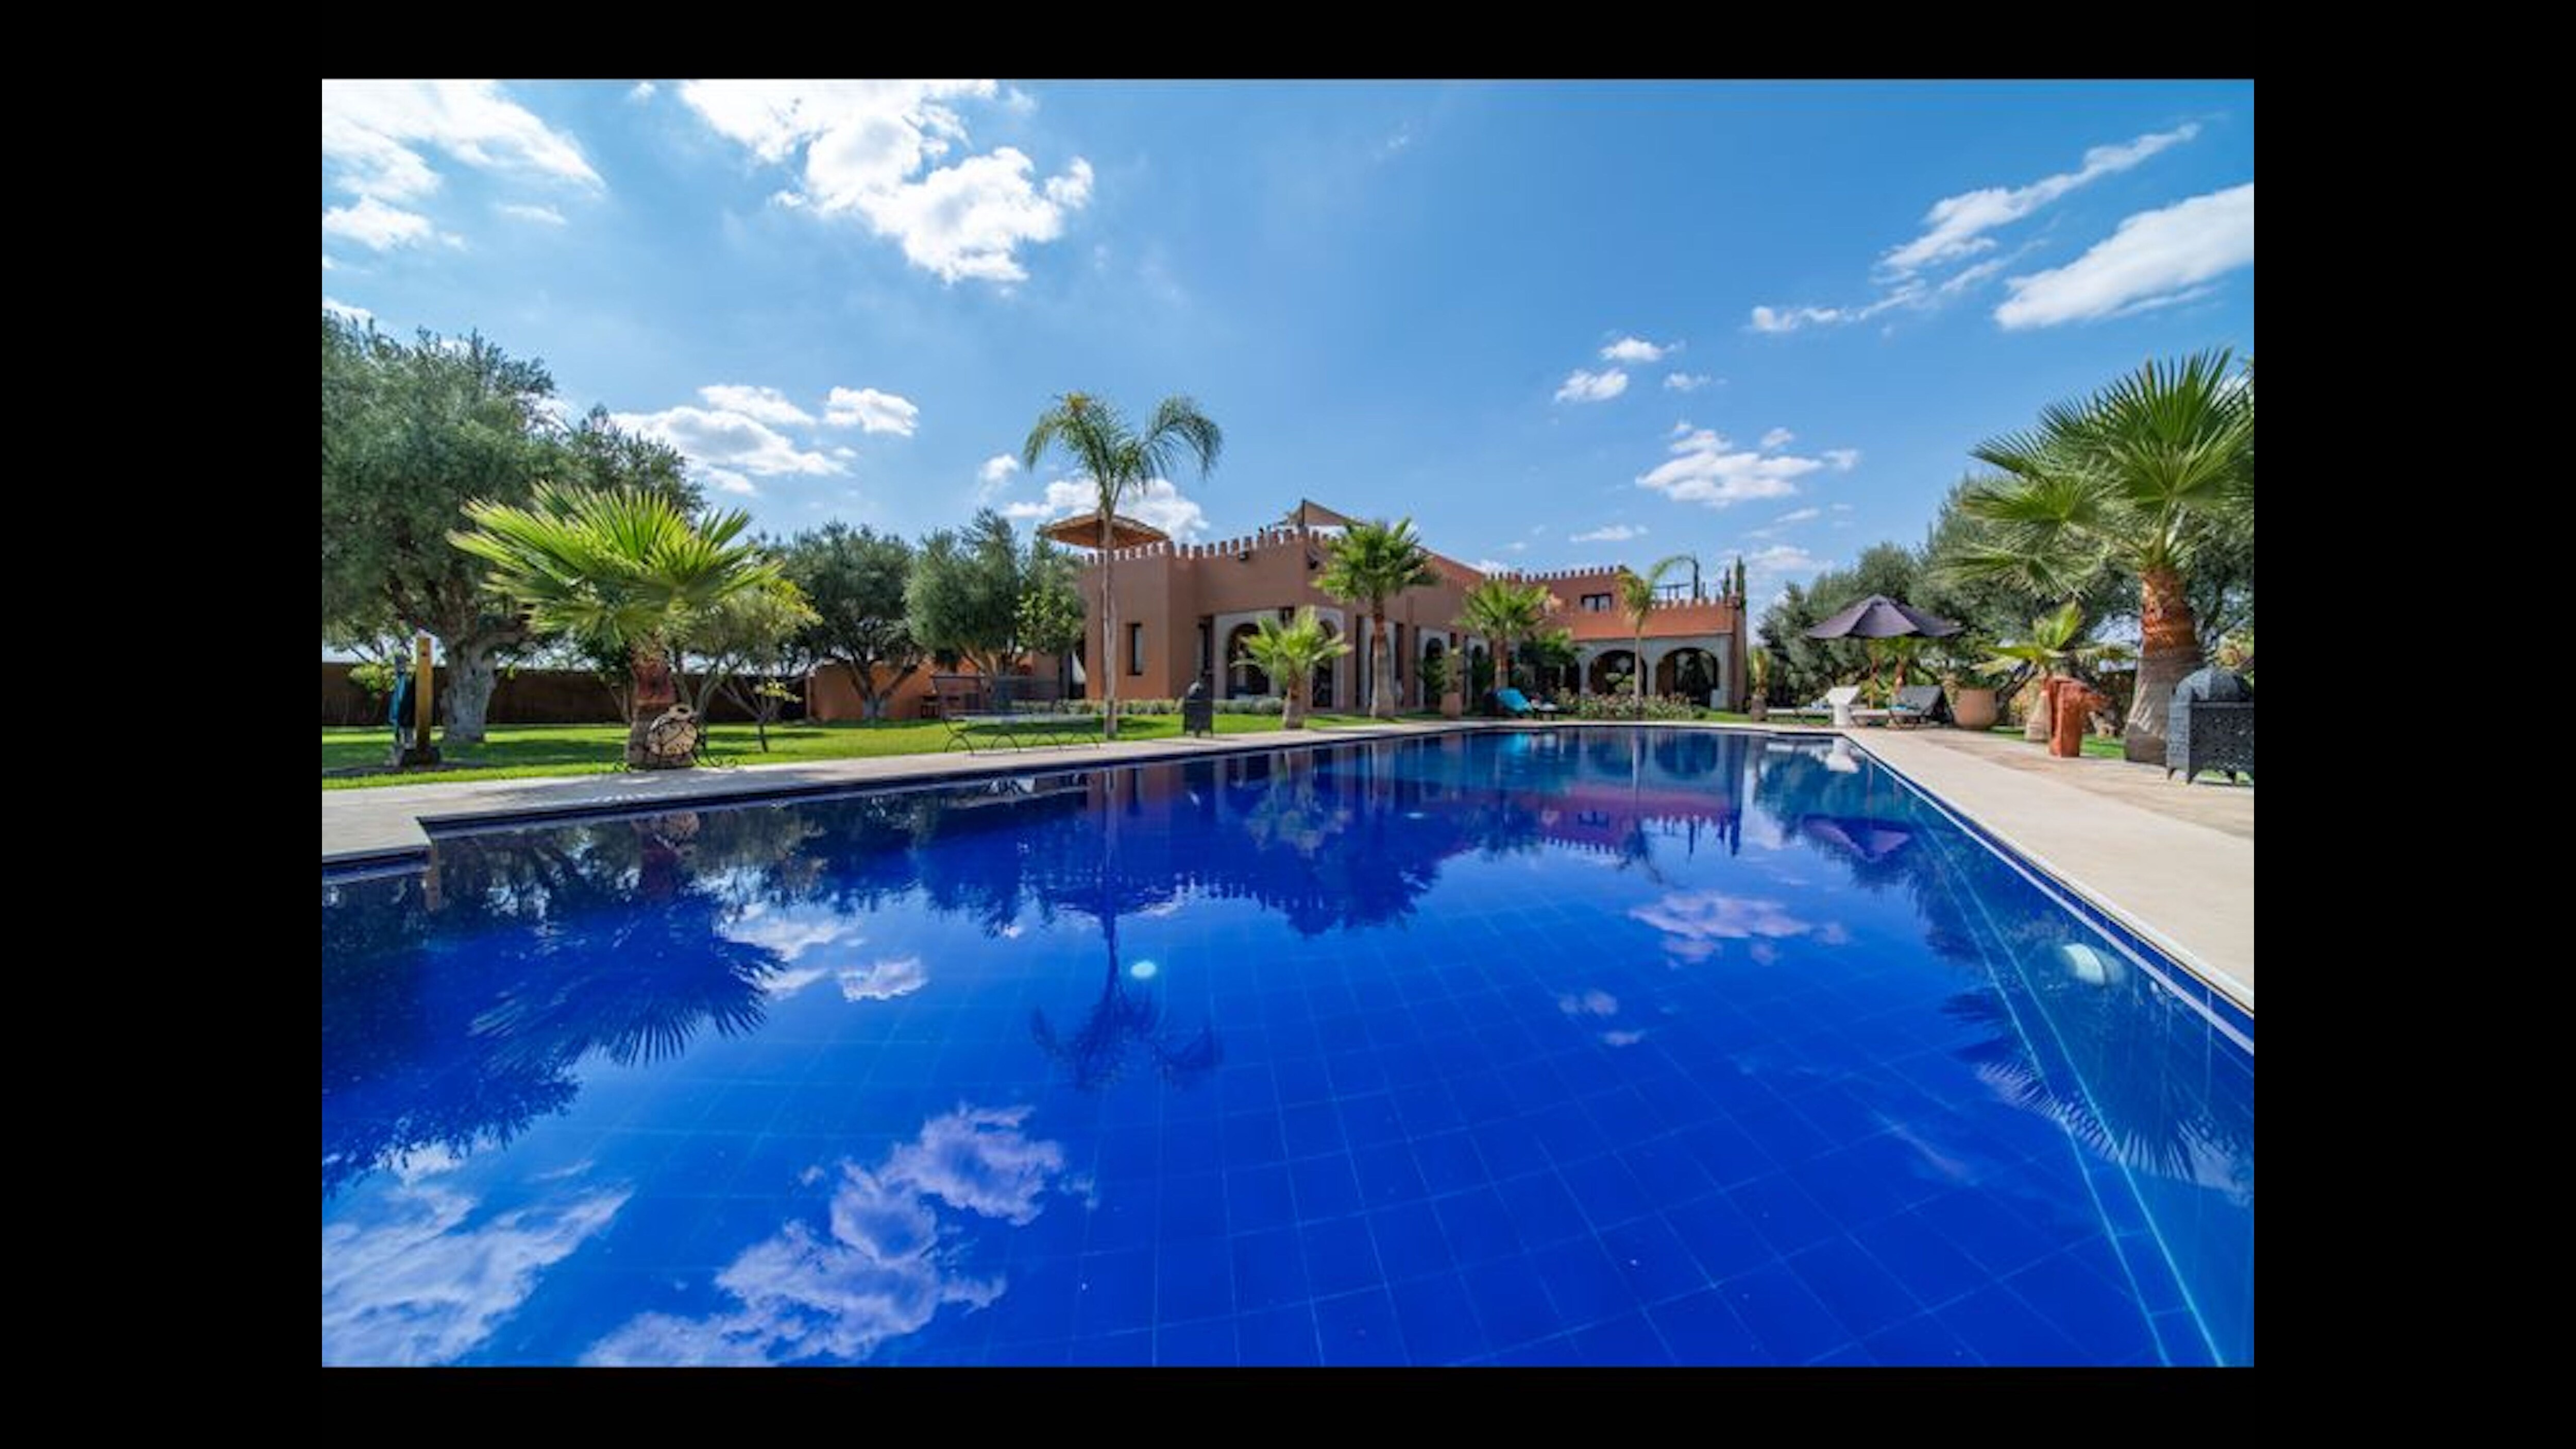 Property Image 1 - Villa with heated pool breakfast included - by feelluxuryholidays